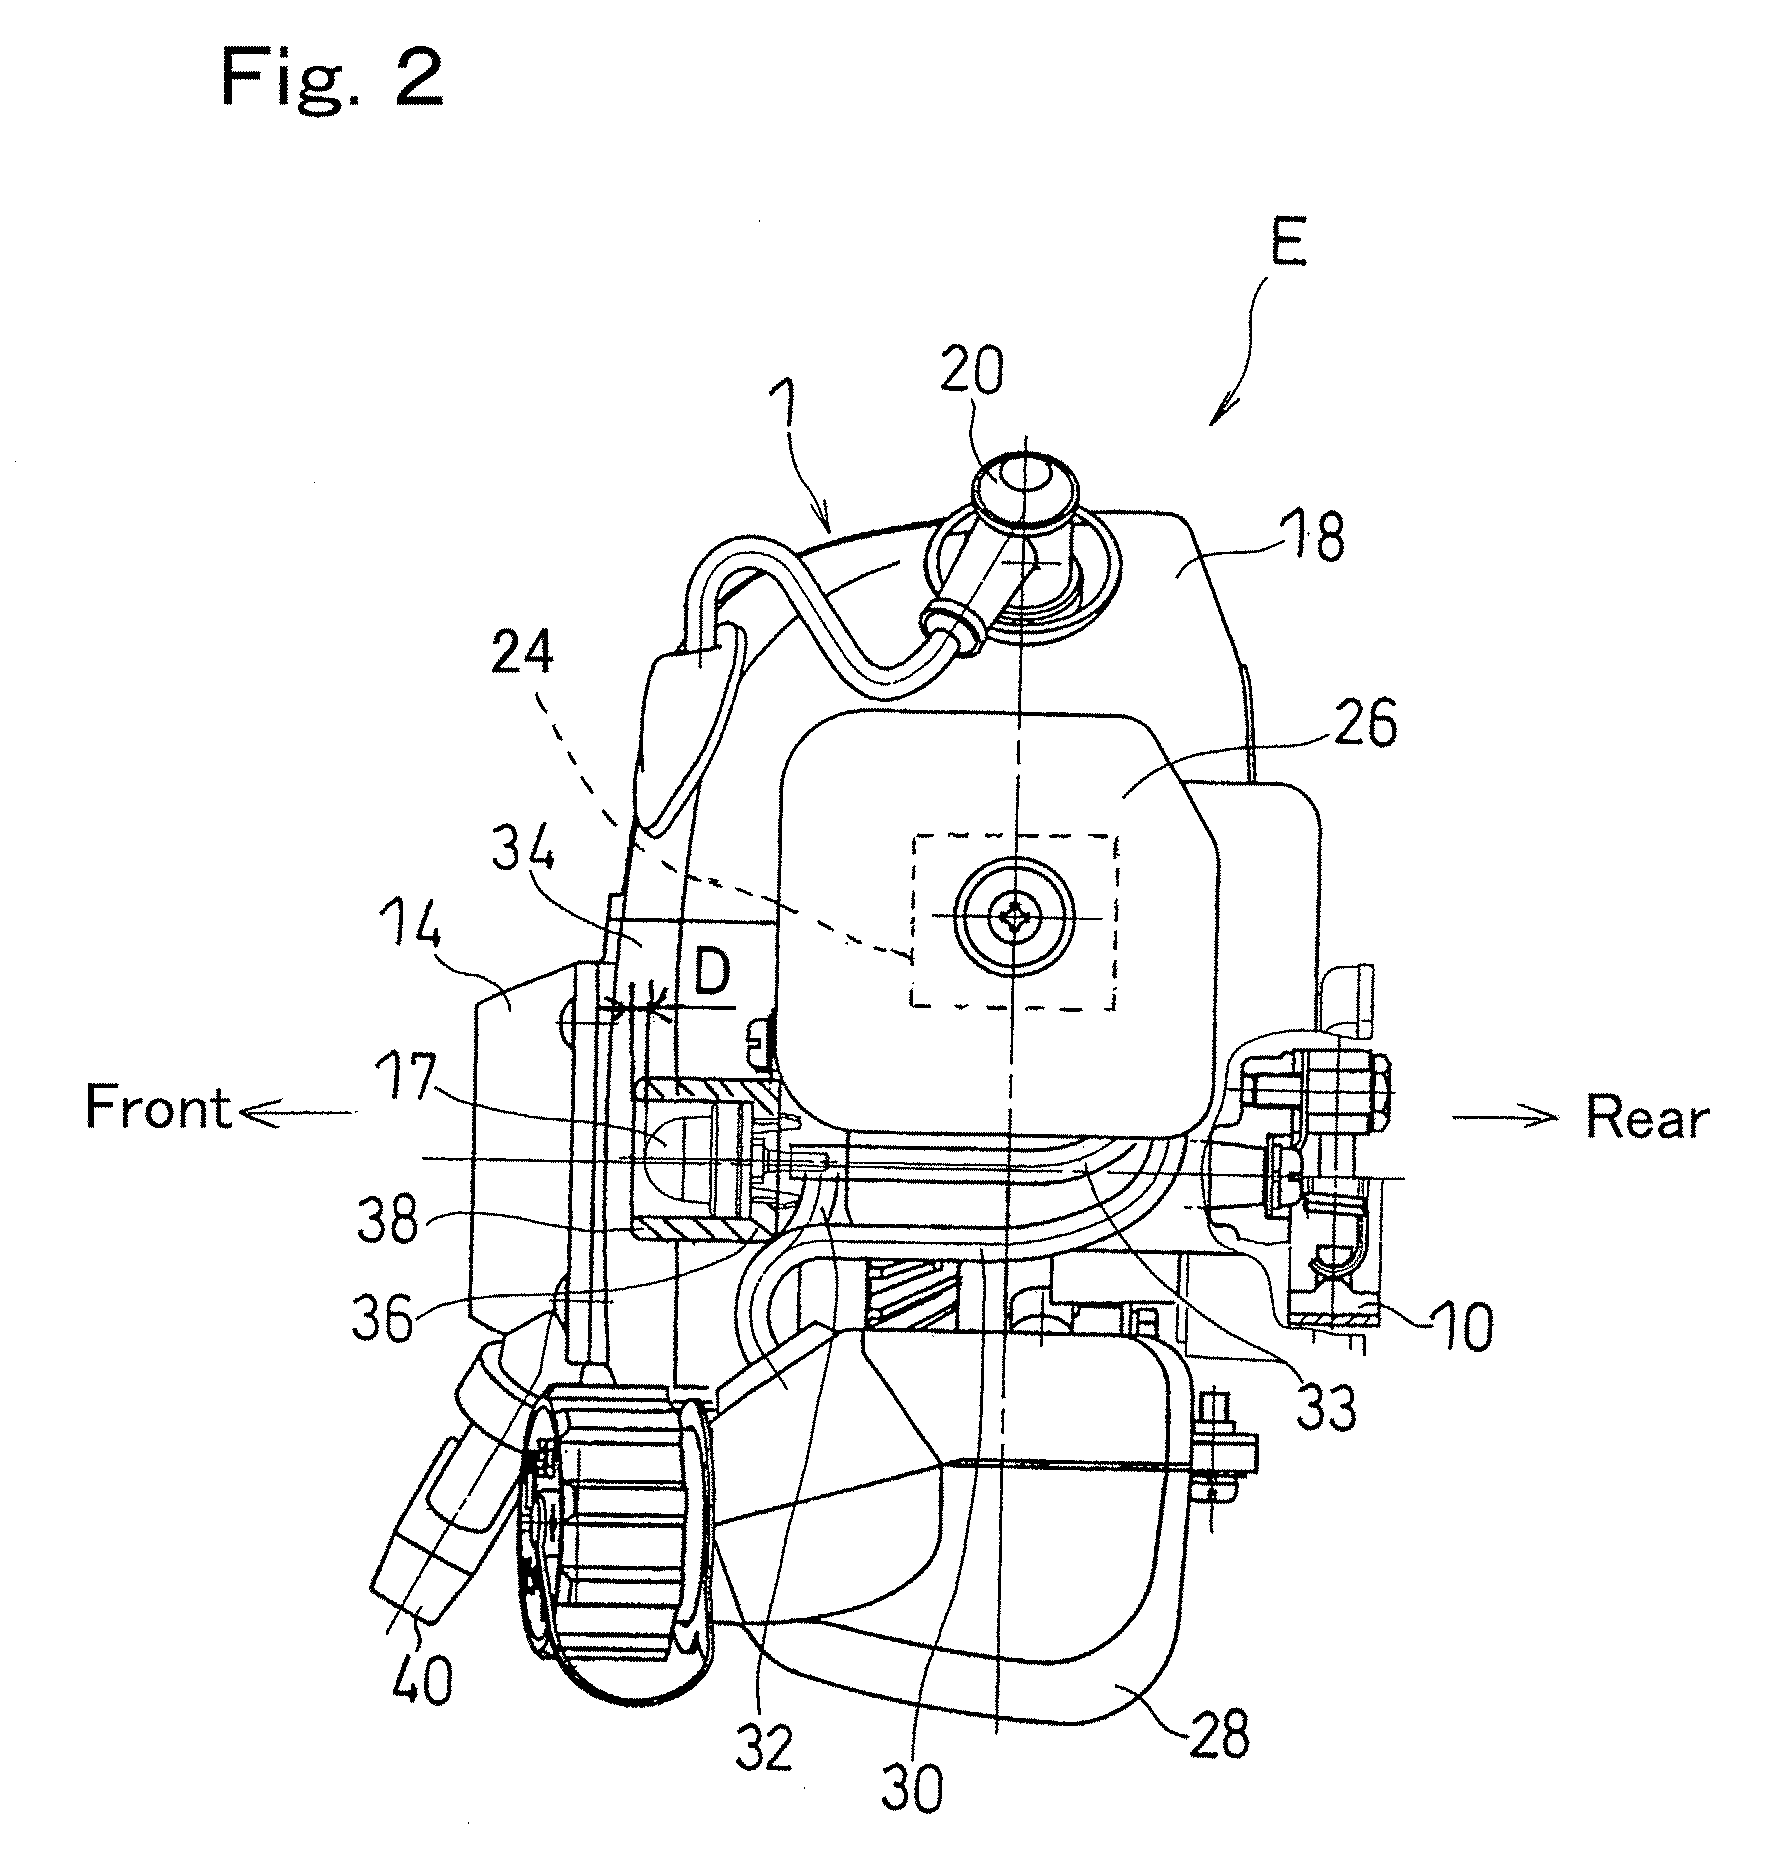 Combustion engine with a priming pump